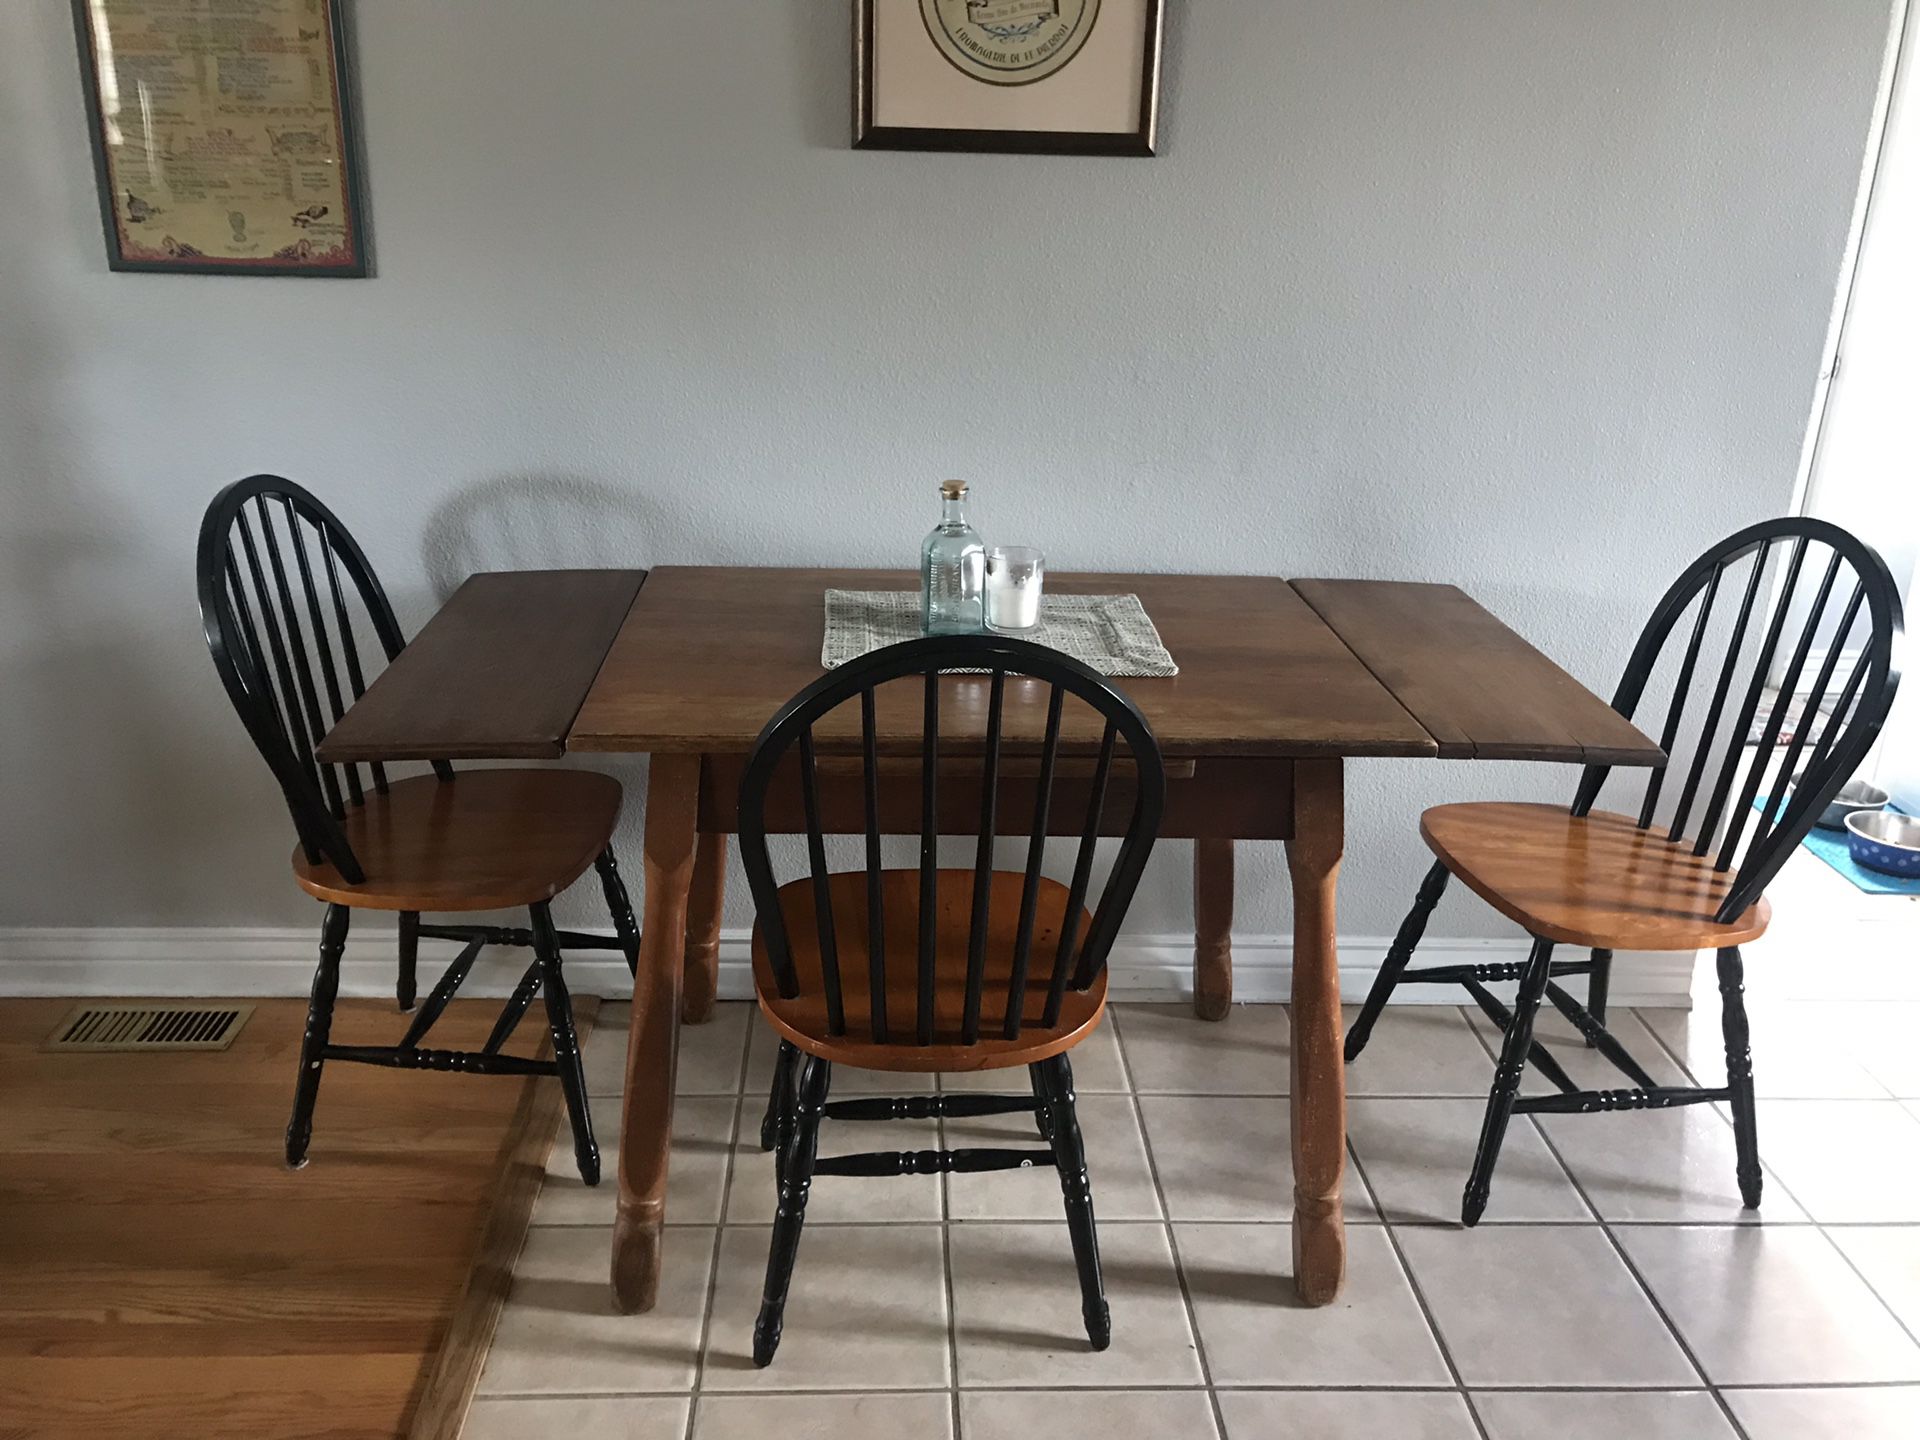 Dining room table with 3 chairs